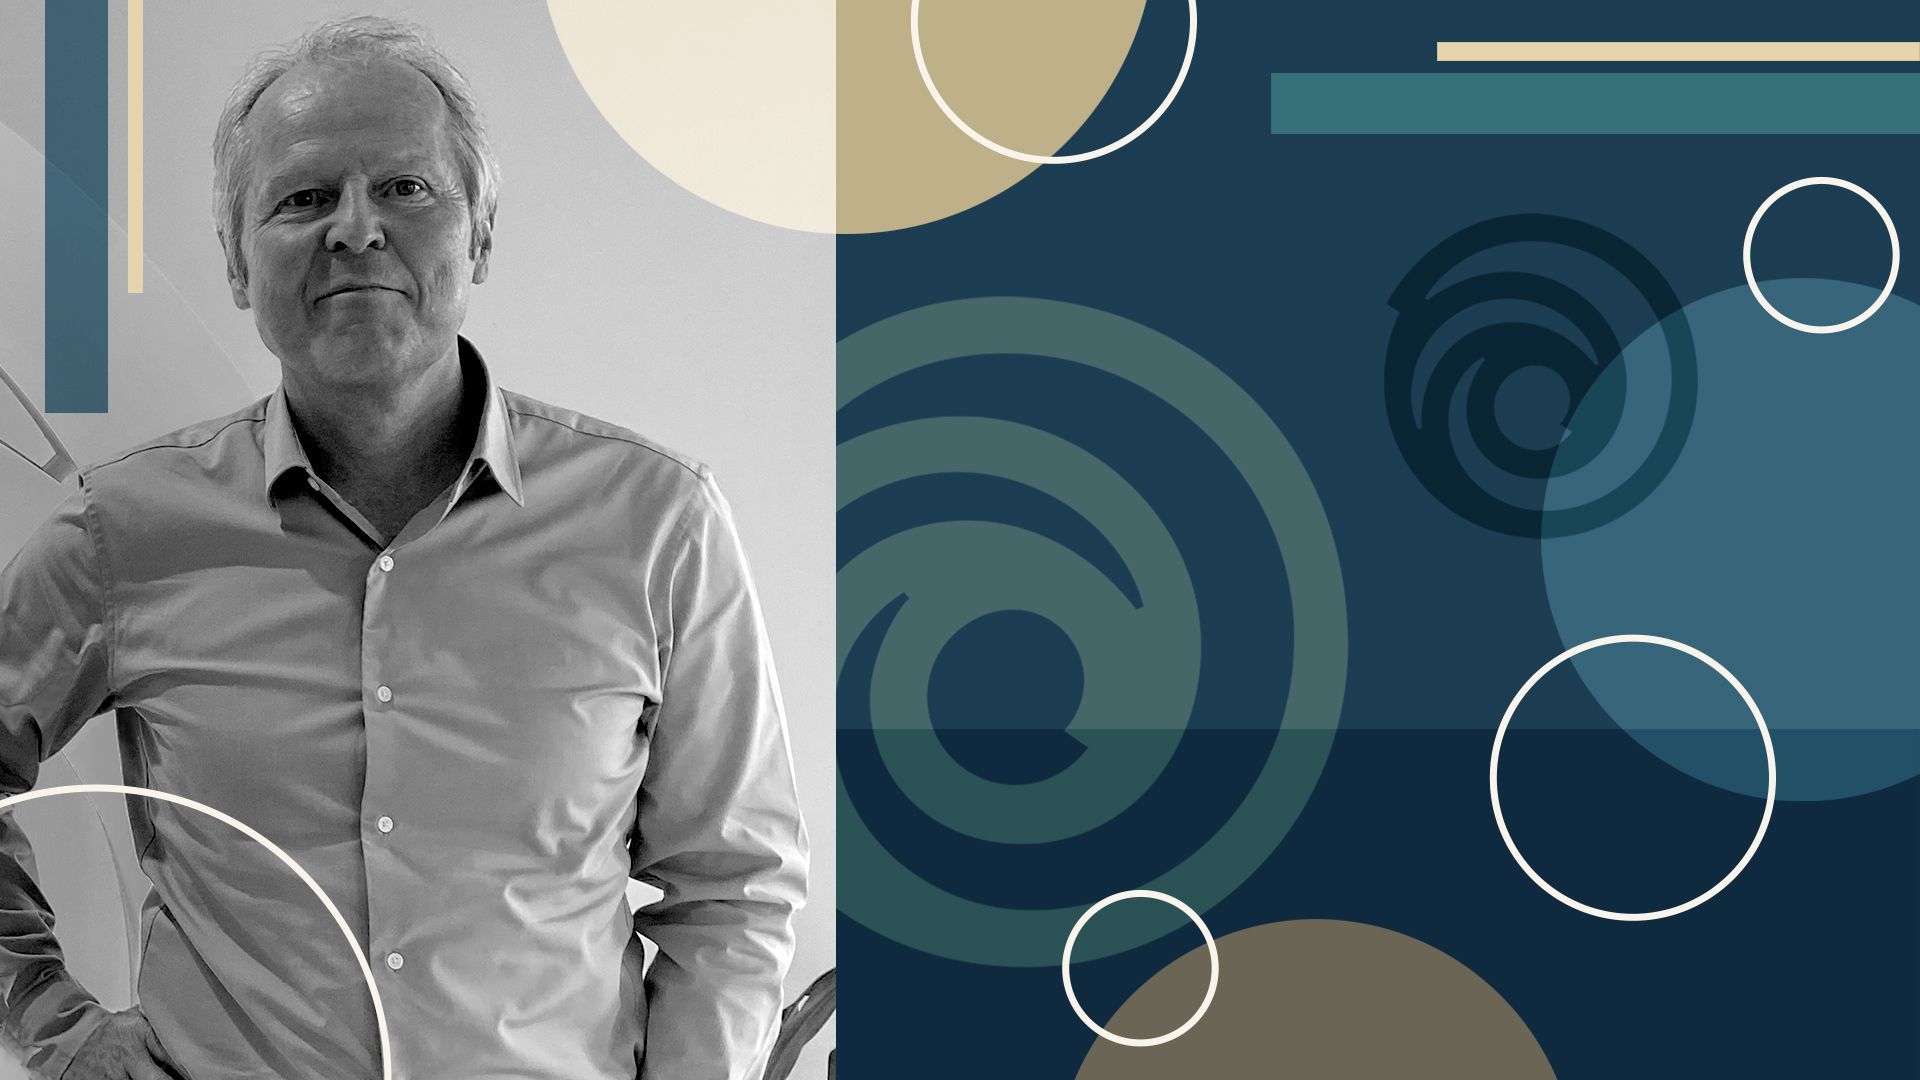 Photo Illustration of Ubisoft CEO, Yves Guillemot, with abstract shapes.